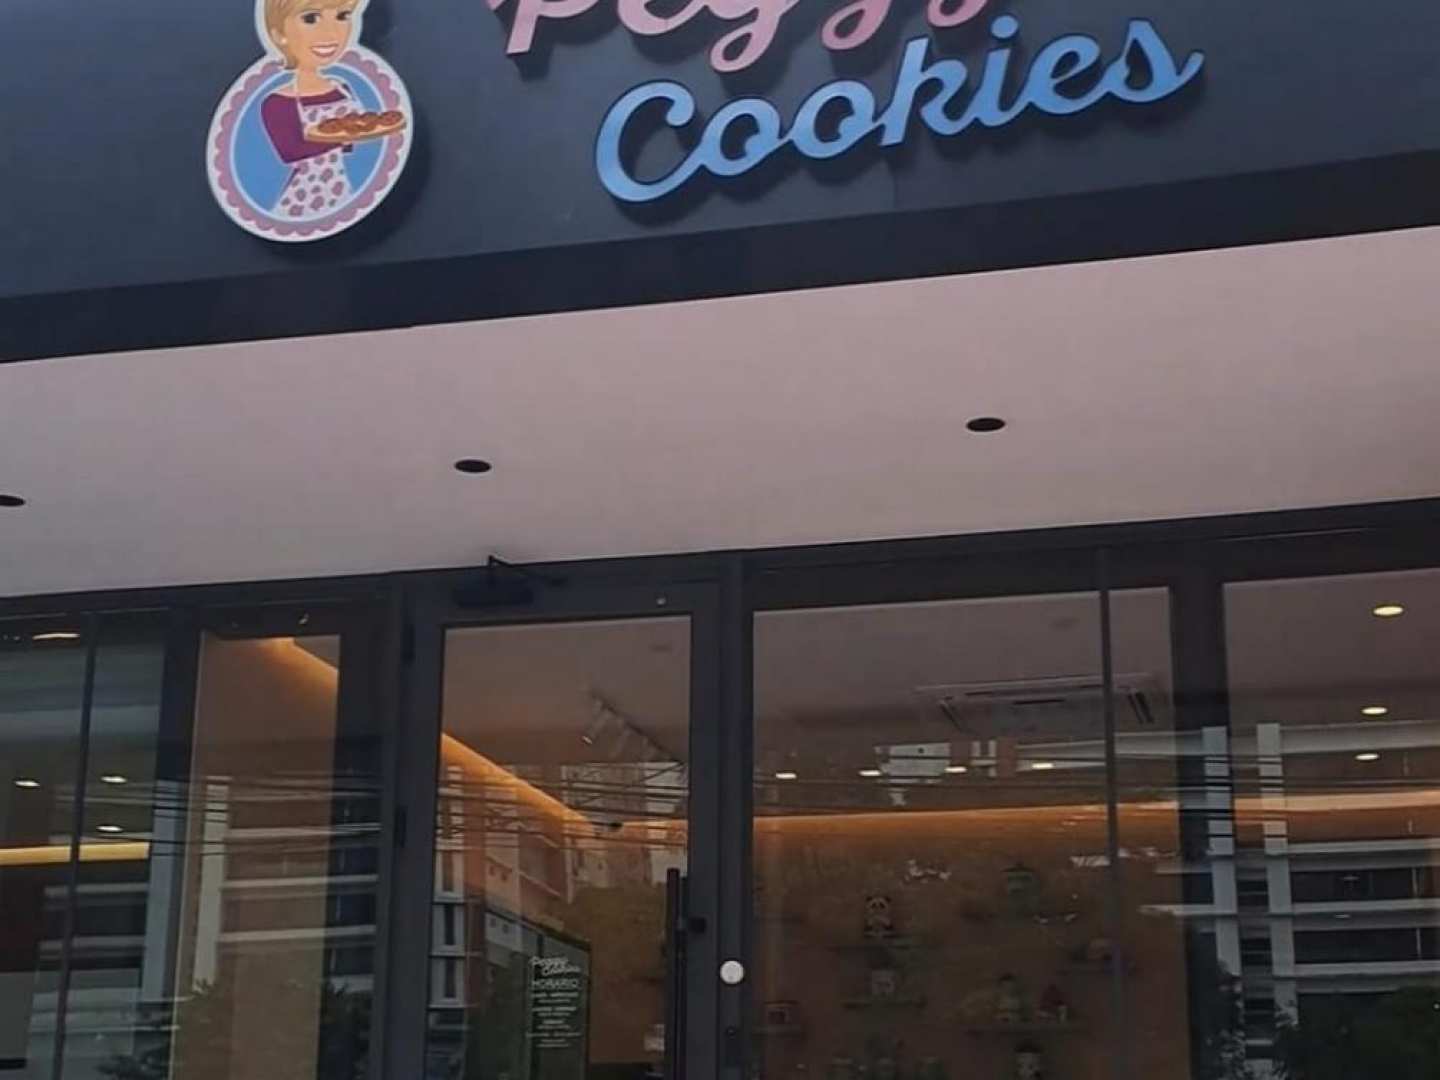 Peggy Cookies